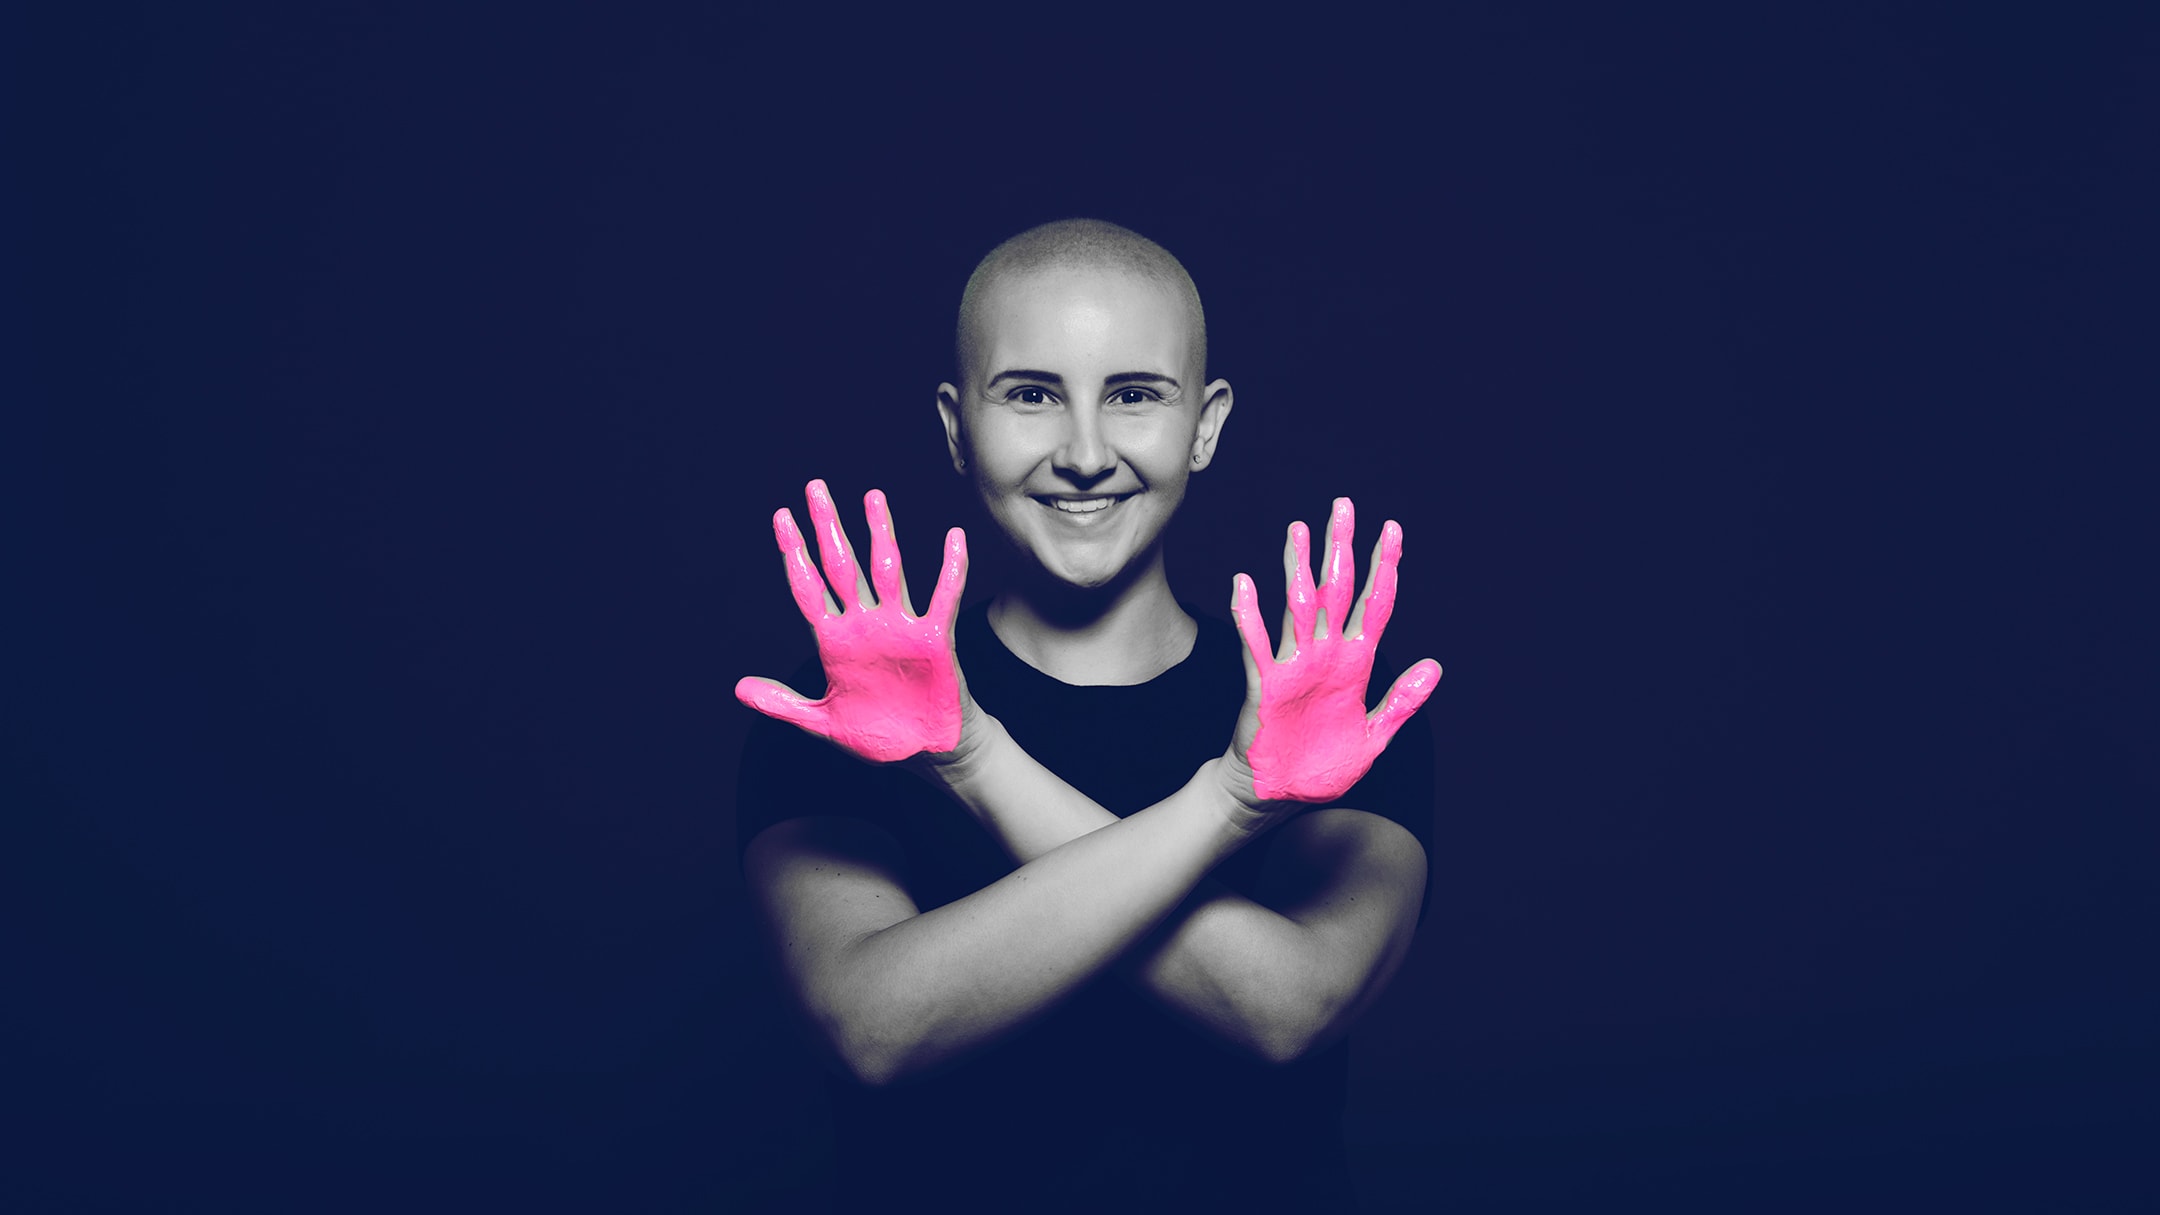 Breast cancer survivor posing for the in our hands campaign with her arms crossed over her chest, palms facing out, and pink paint on her hands. BayCare Hospital Marketing campaign